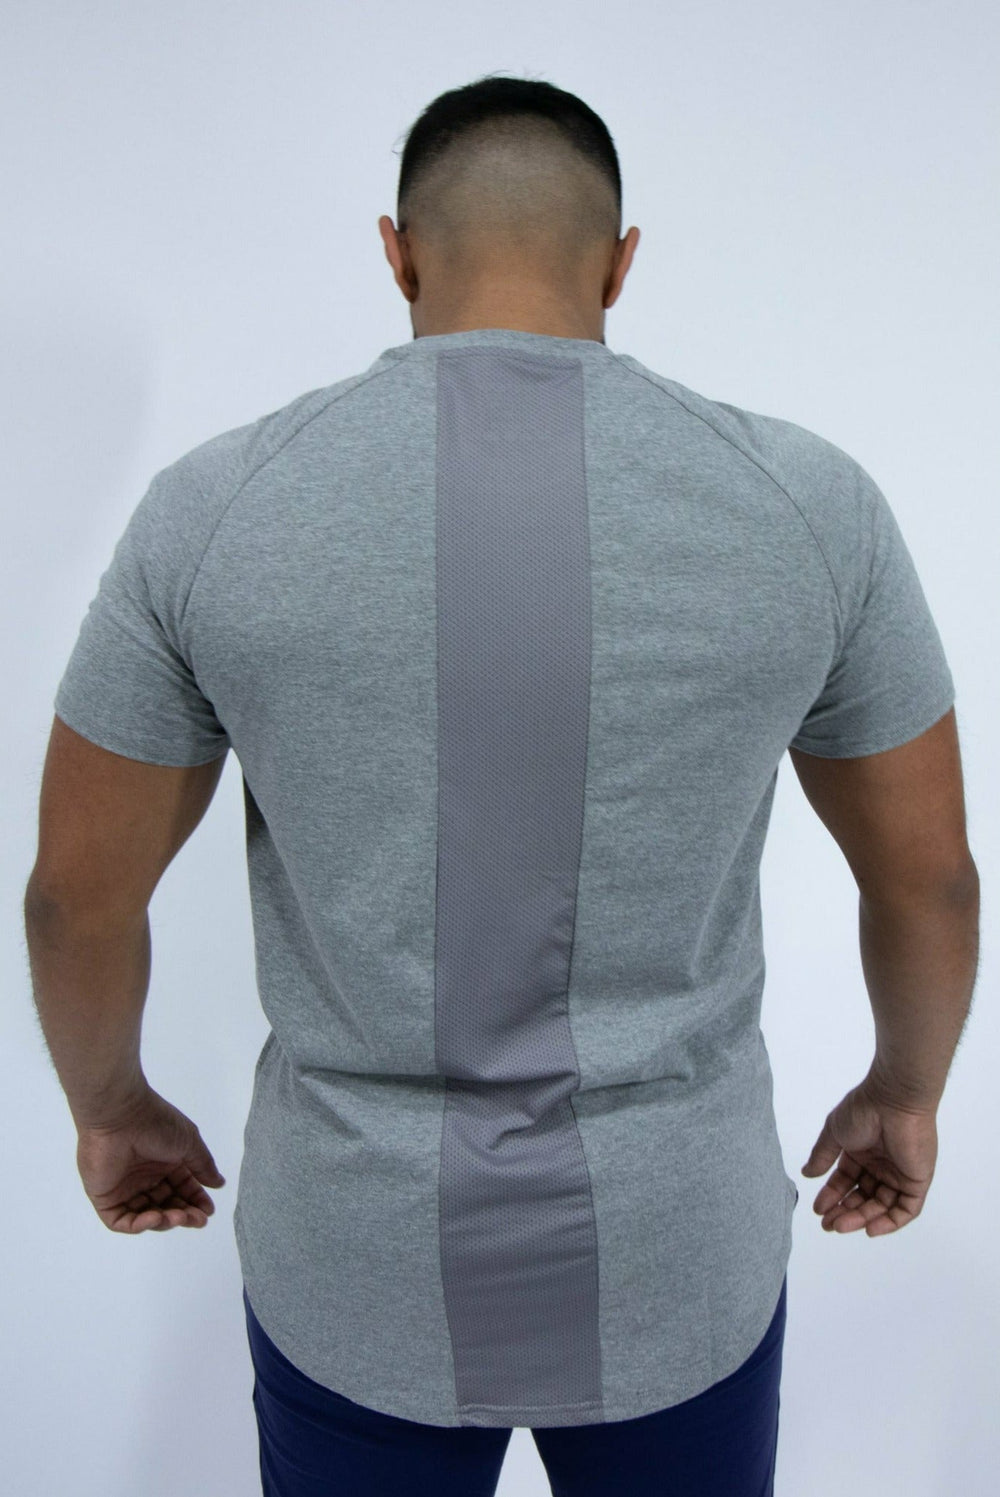 Our IXK Cotton Tee is perfect for intense workouts, errands and rest days. With it's high-quality and sleek finish you'll never want to take it off. Available in Blue/Black/Grey. Back View in Grey.